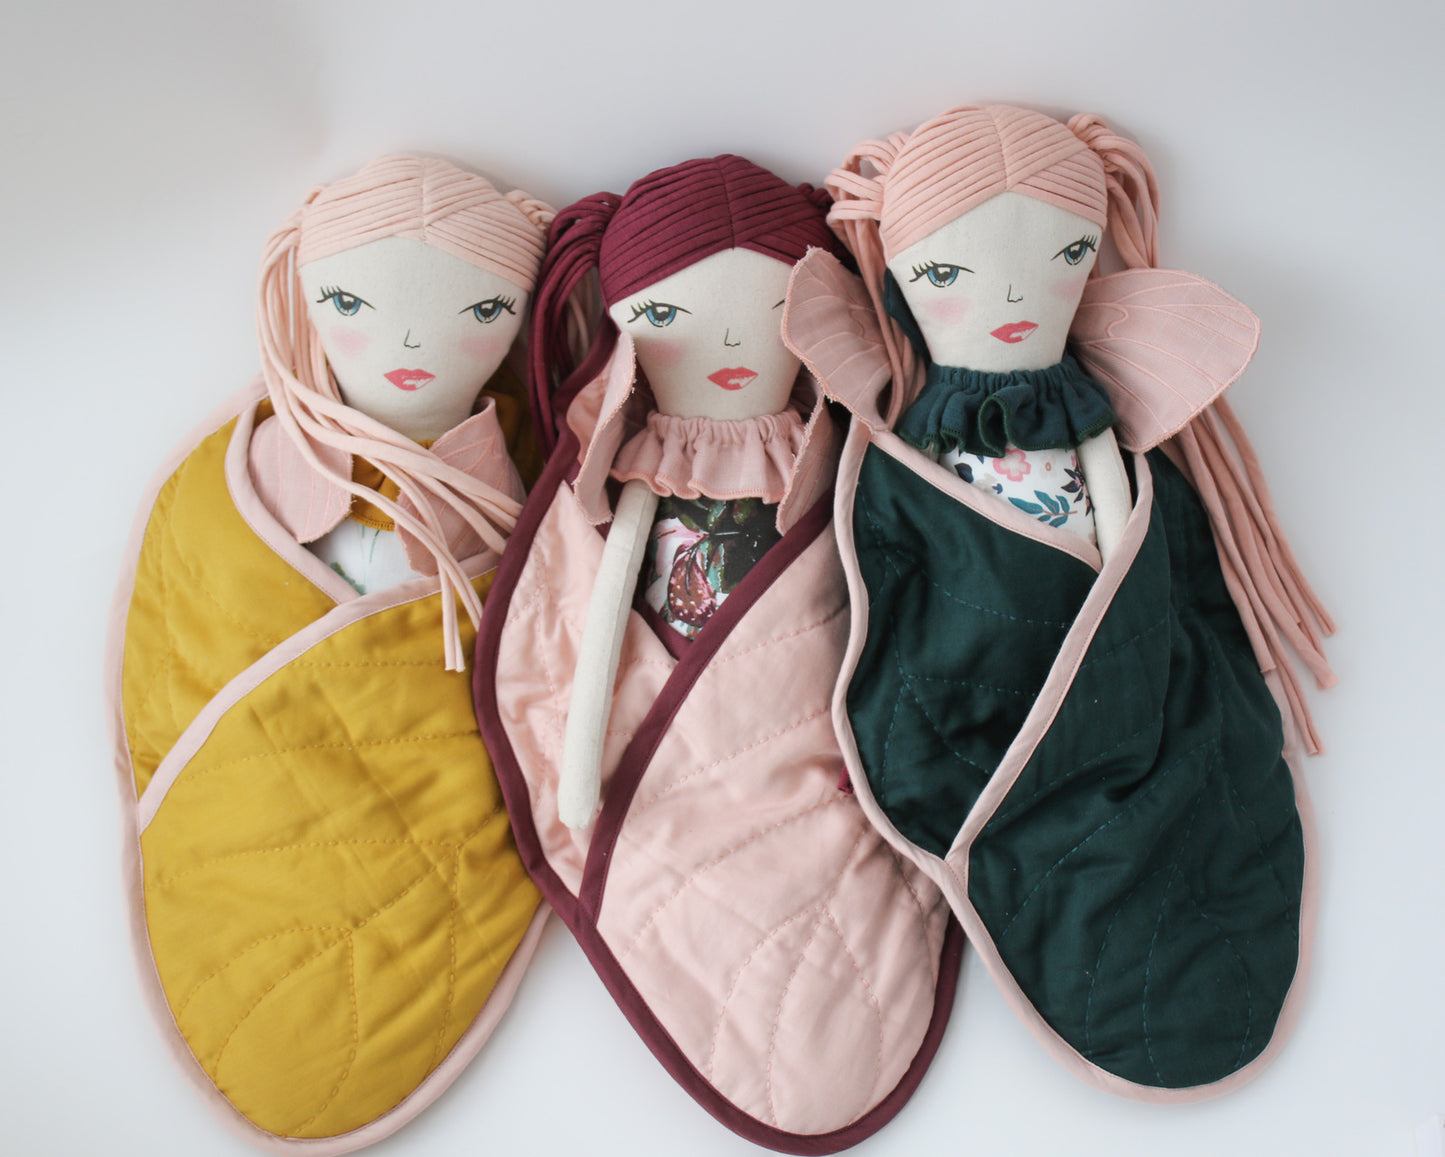 Burrow & Be Fairy Doll and Sleeping Bag Clementine